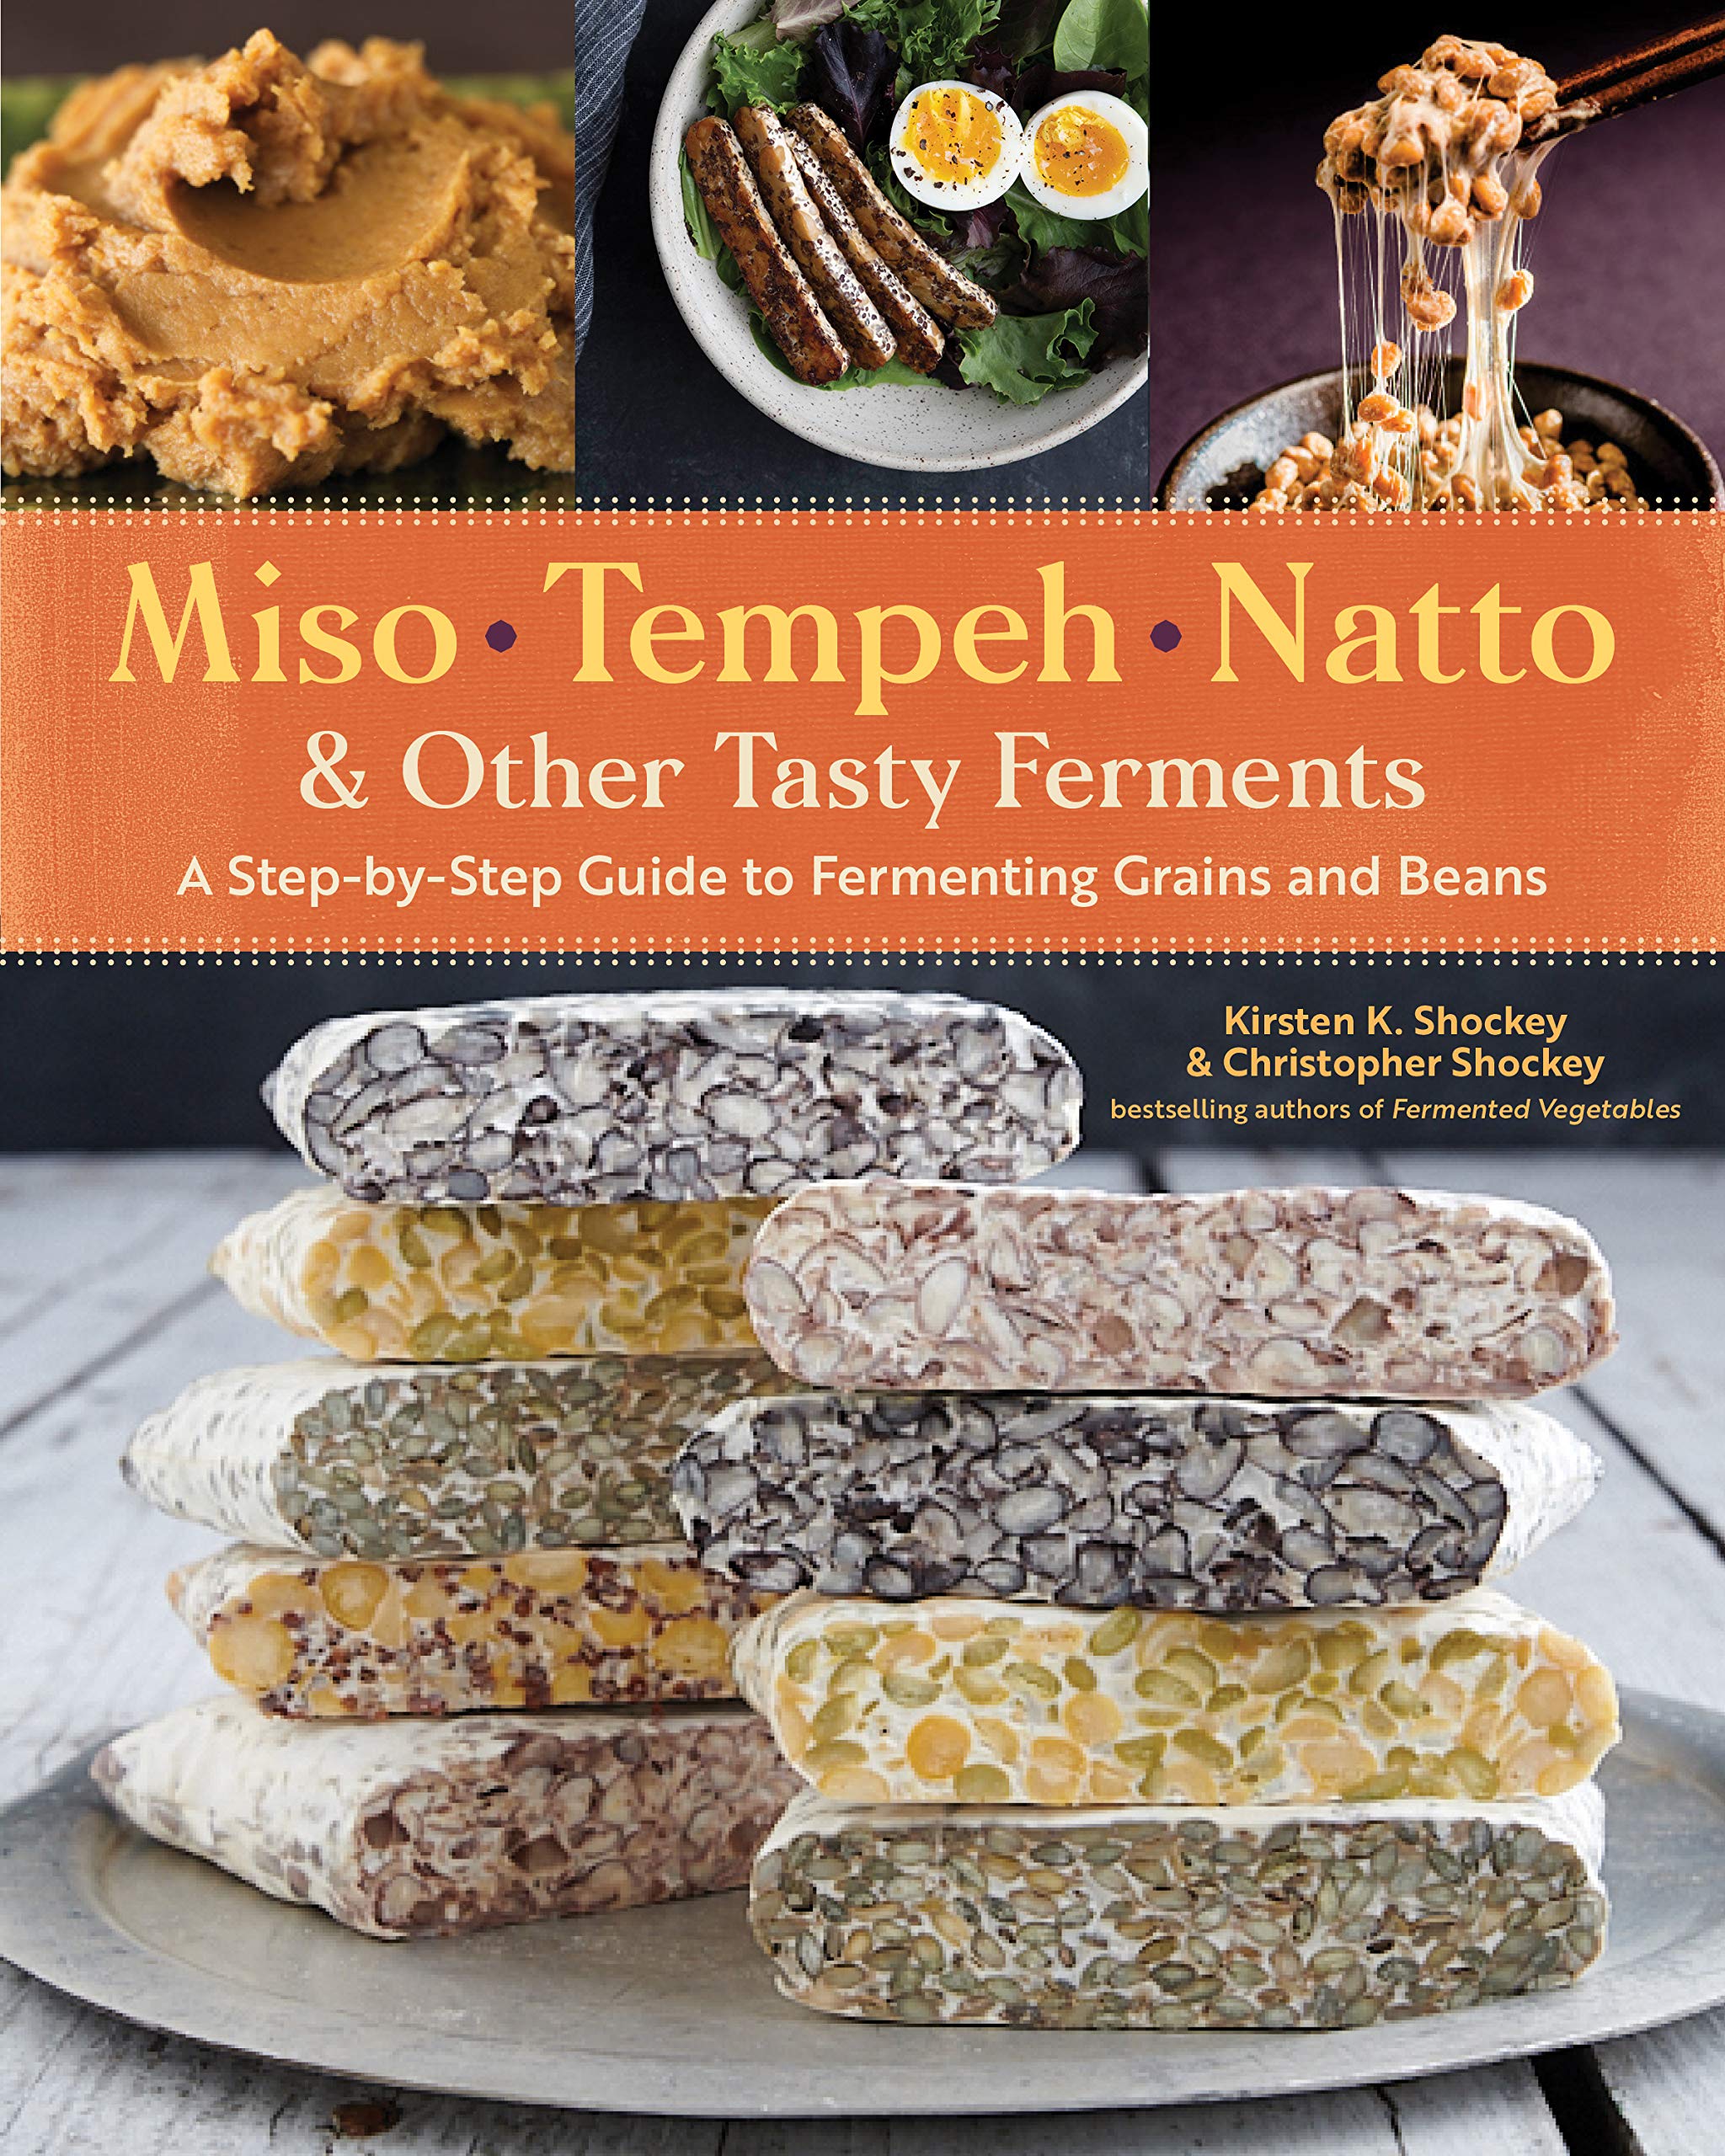 Miso, Tempeh, Natto & Other Tasty Ferments: A Step-by-Step Guide to Fermenting Grains and Beans (Kristin Shockey, Christopher Shockey)